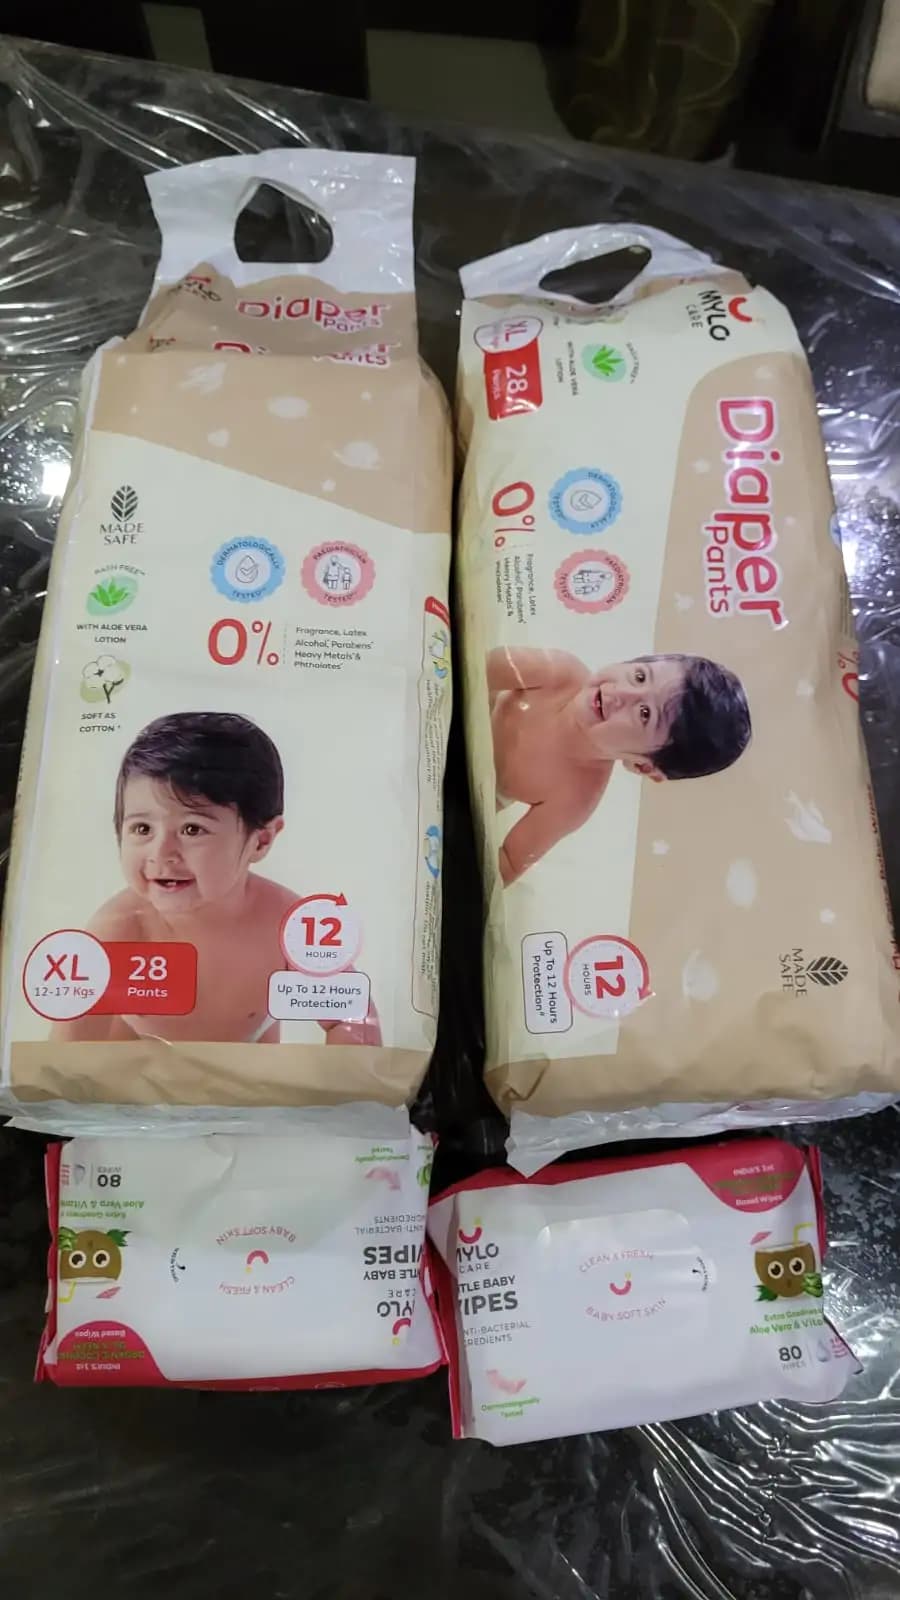 Monthly Diapering Super Saver Combo - Diaper Pants (L) Size (Pack of 2, 64 Count) + Wipes (Pack of 2)